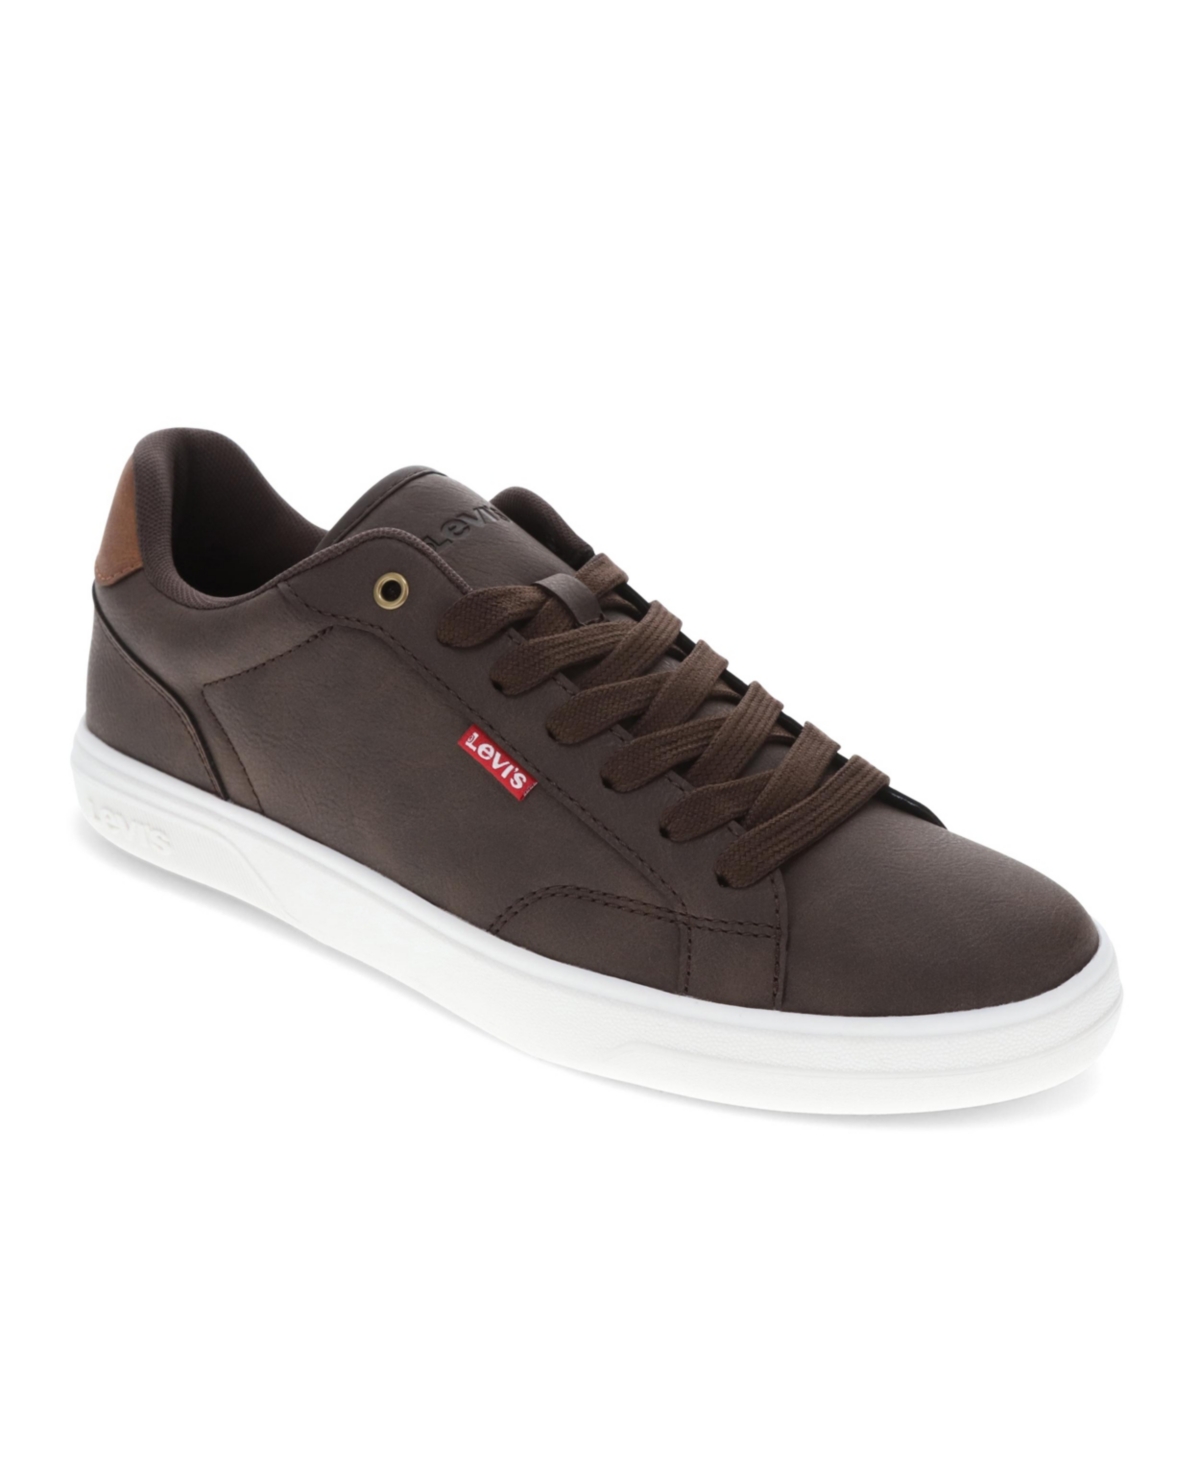 Levi's Men's Munro Ul Faux Leather Lace-up Sneakers Men's Shoes In Dark Brown